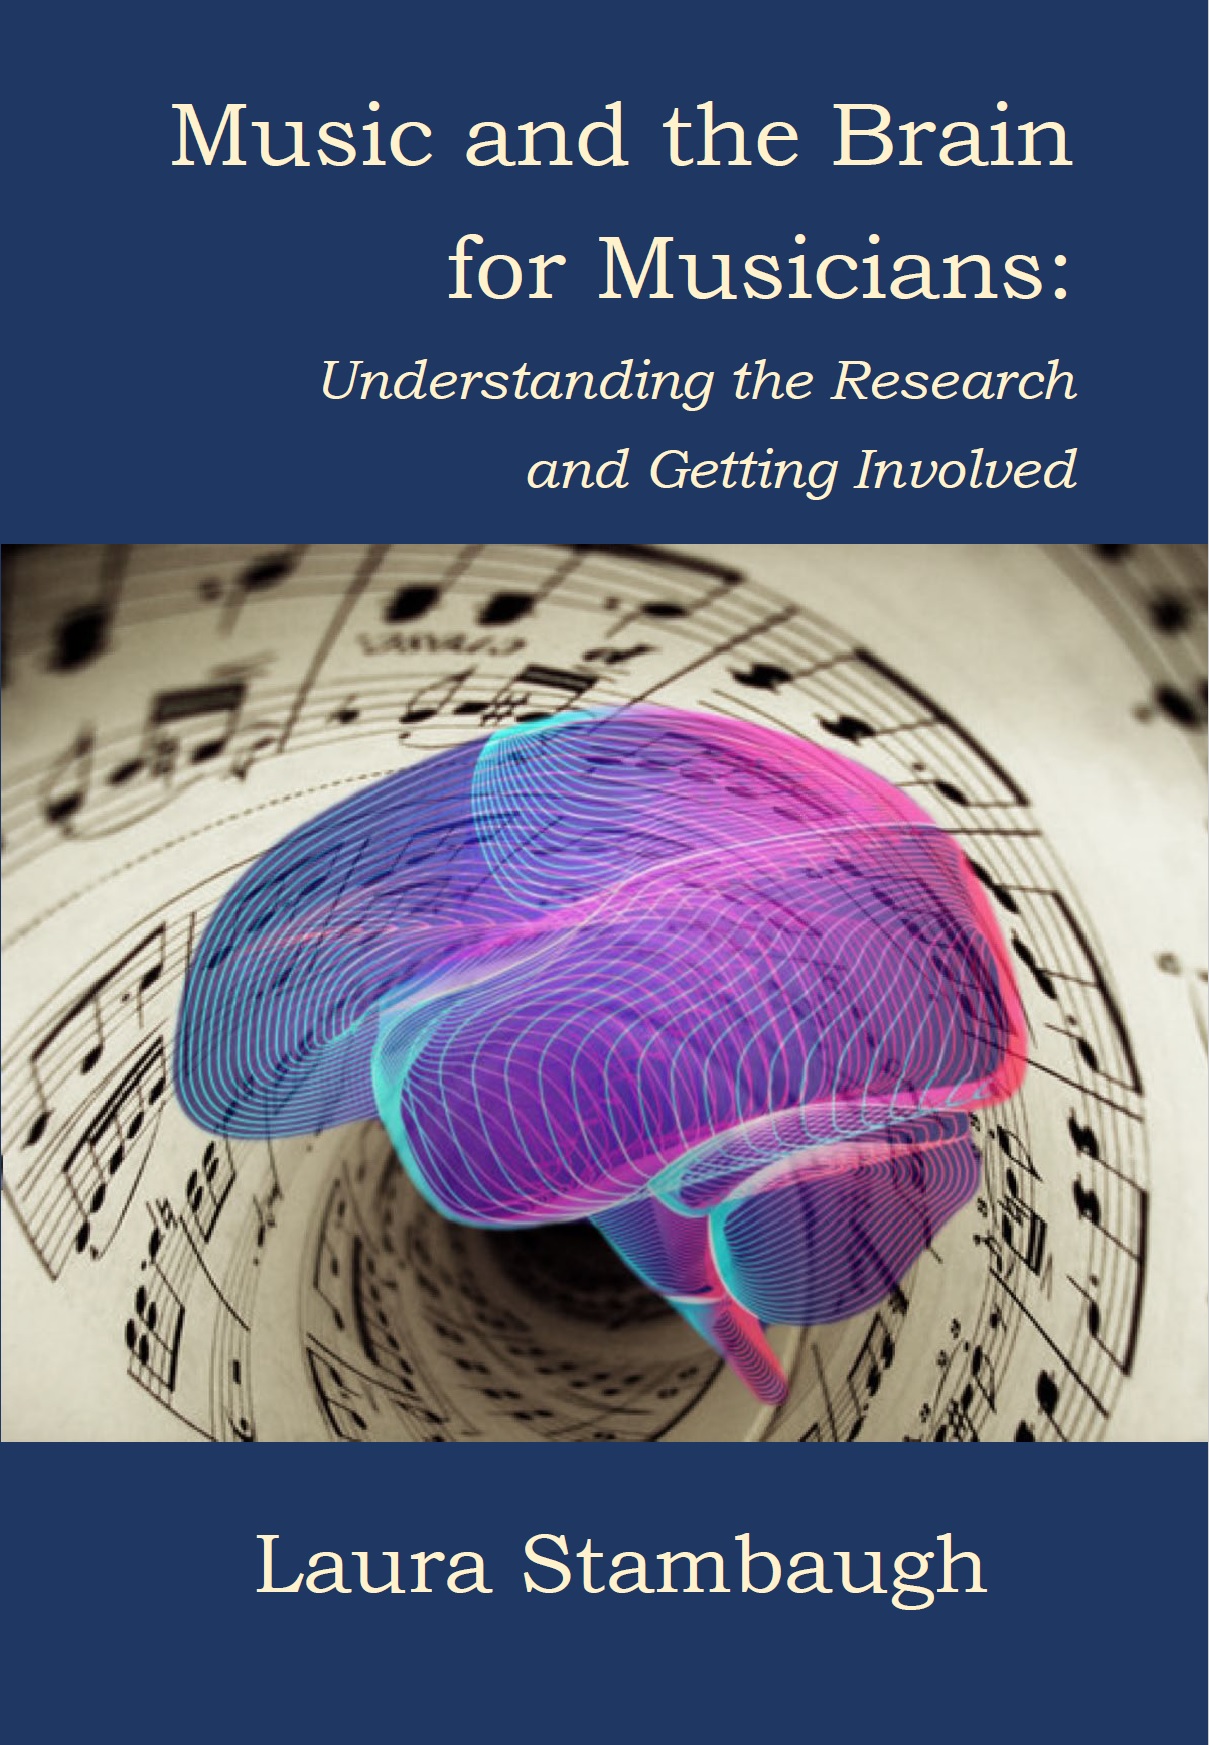 Learning Through Music: The Support of Brain Research